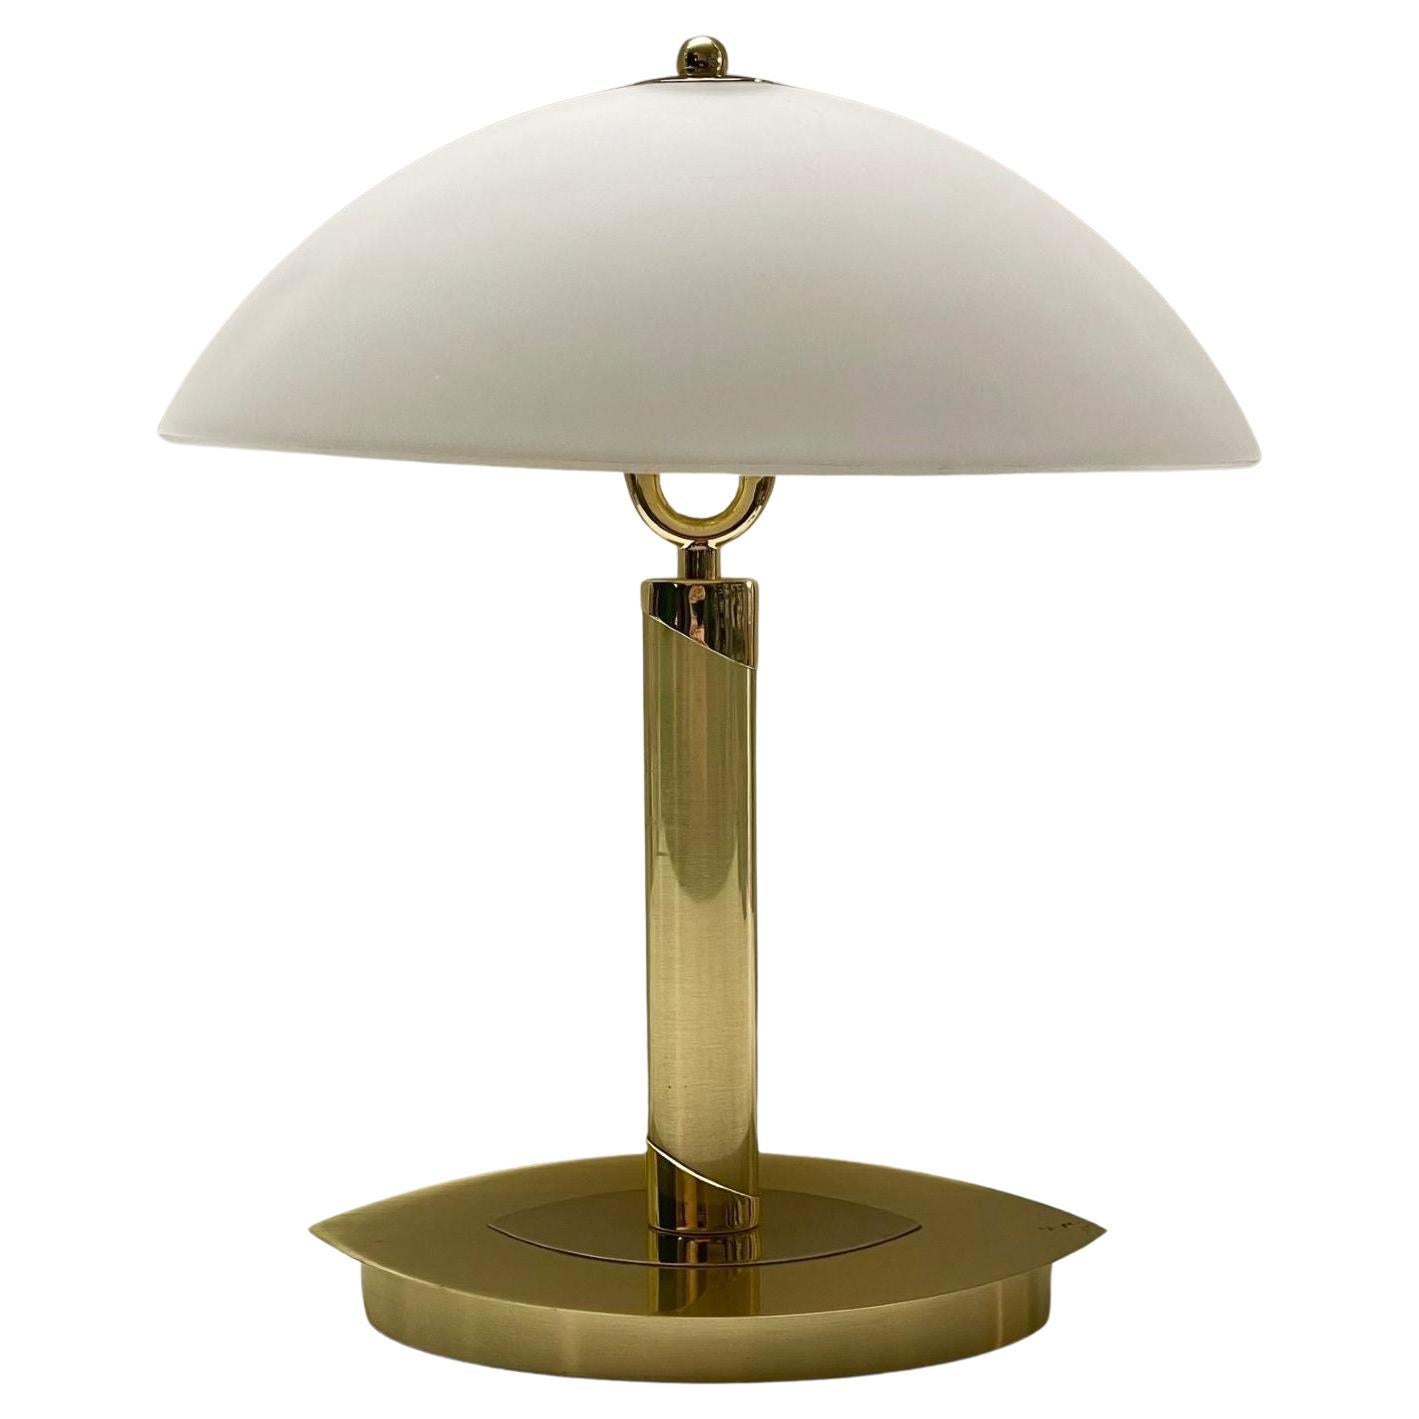 Bauhaus Chased Brass Satin Glass Two-Light Bankers Desk Lamp Table Lamp, 1960s For Sale